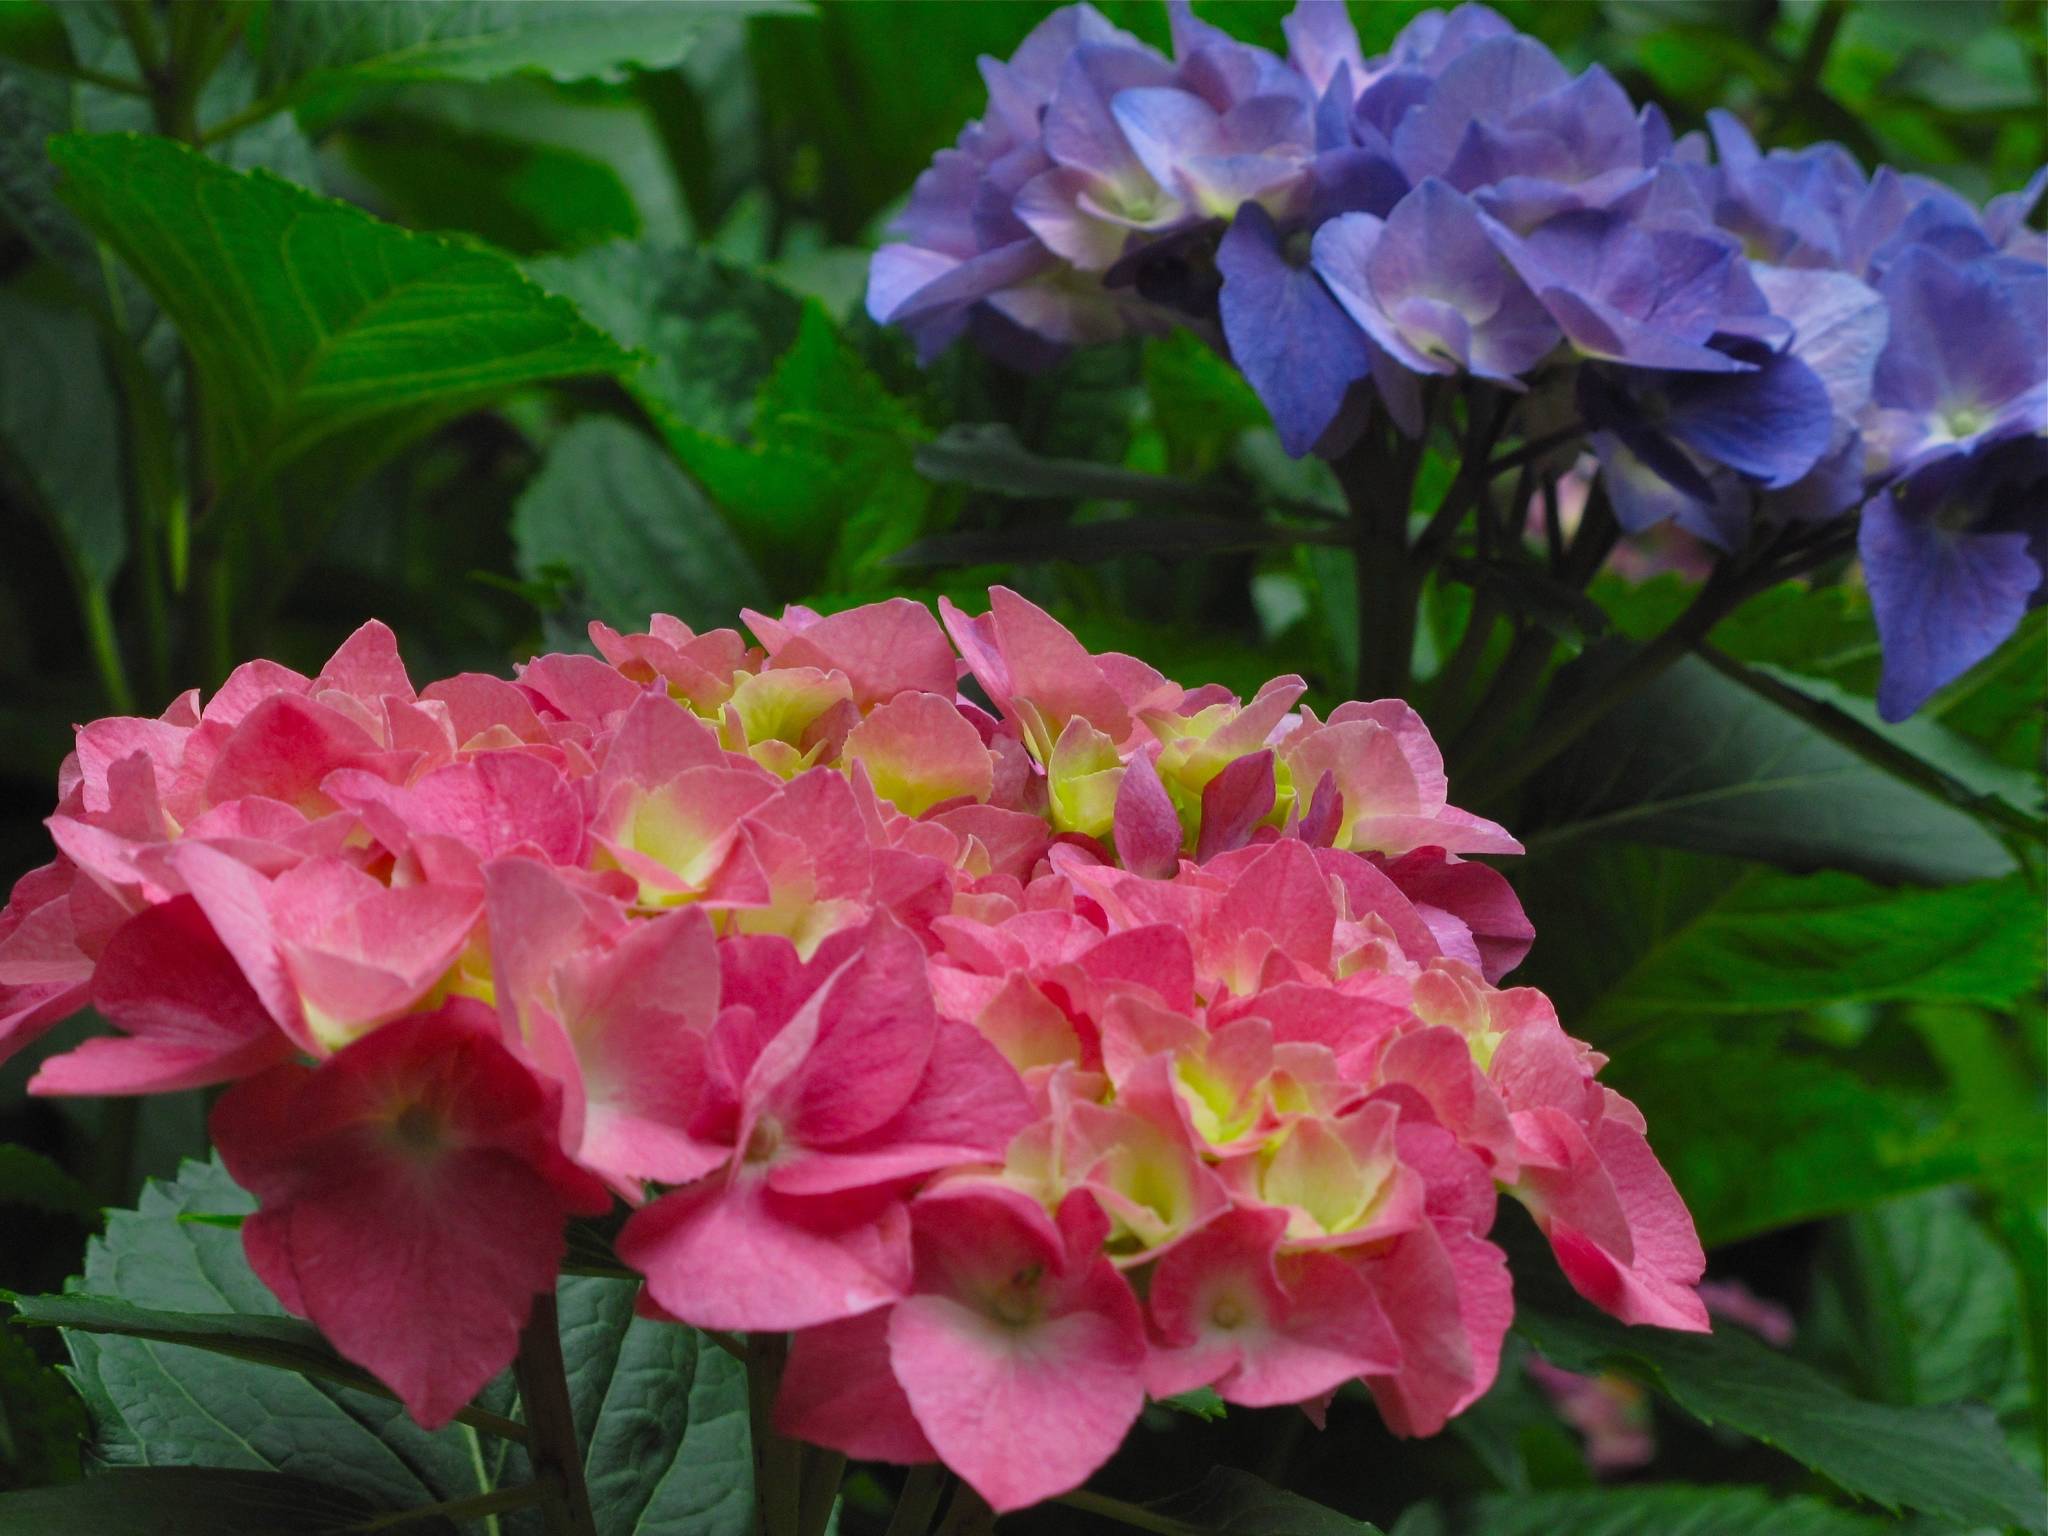 This June 6, 2010 photo taken in New Market, Va., shows hydrangea blooming red and blue on the same bush. Hydrangea are coarse-textured plants that draw the eye because of their contrasts in shape or appearance. (Dean Fosdick via AP)